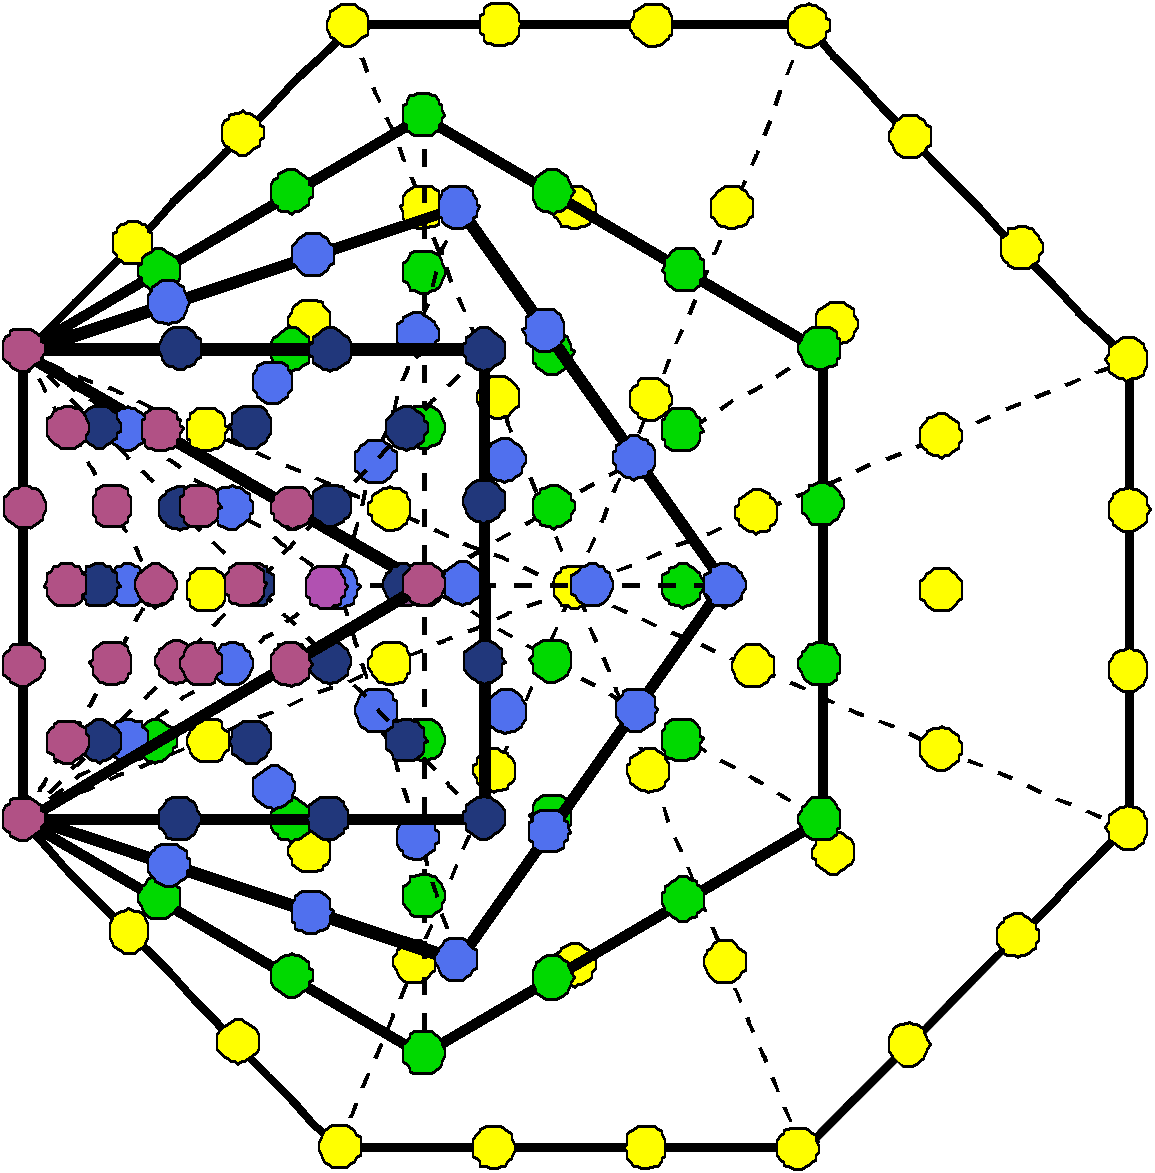 139 yods in first 5 enfolded polygons